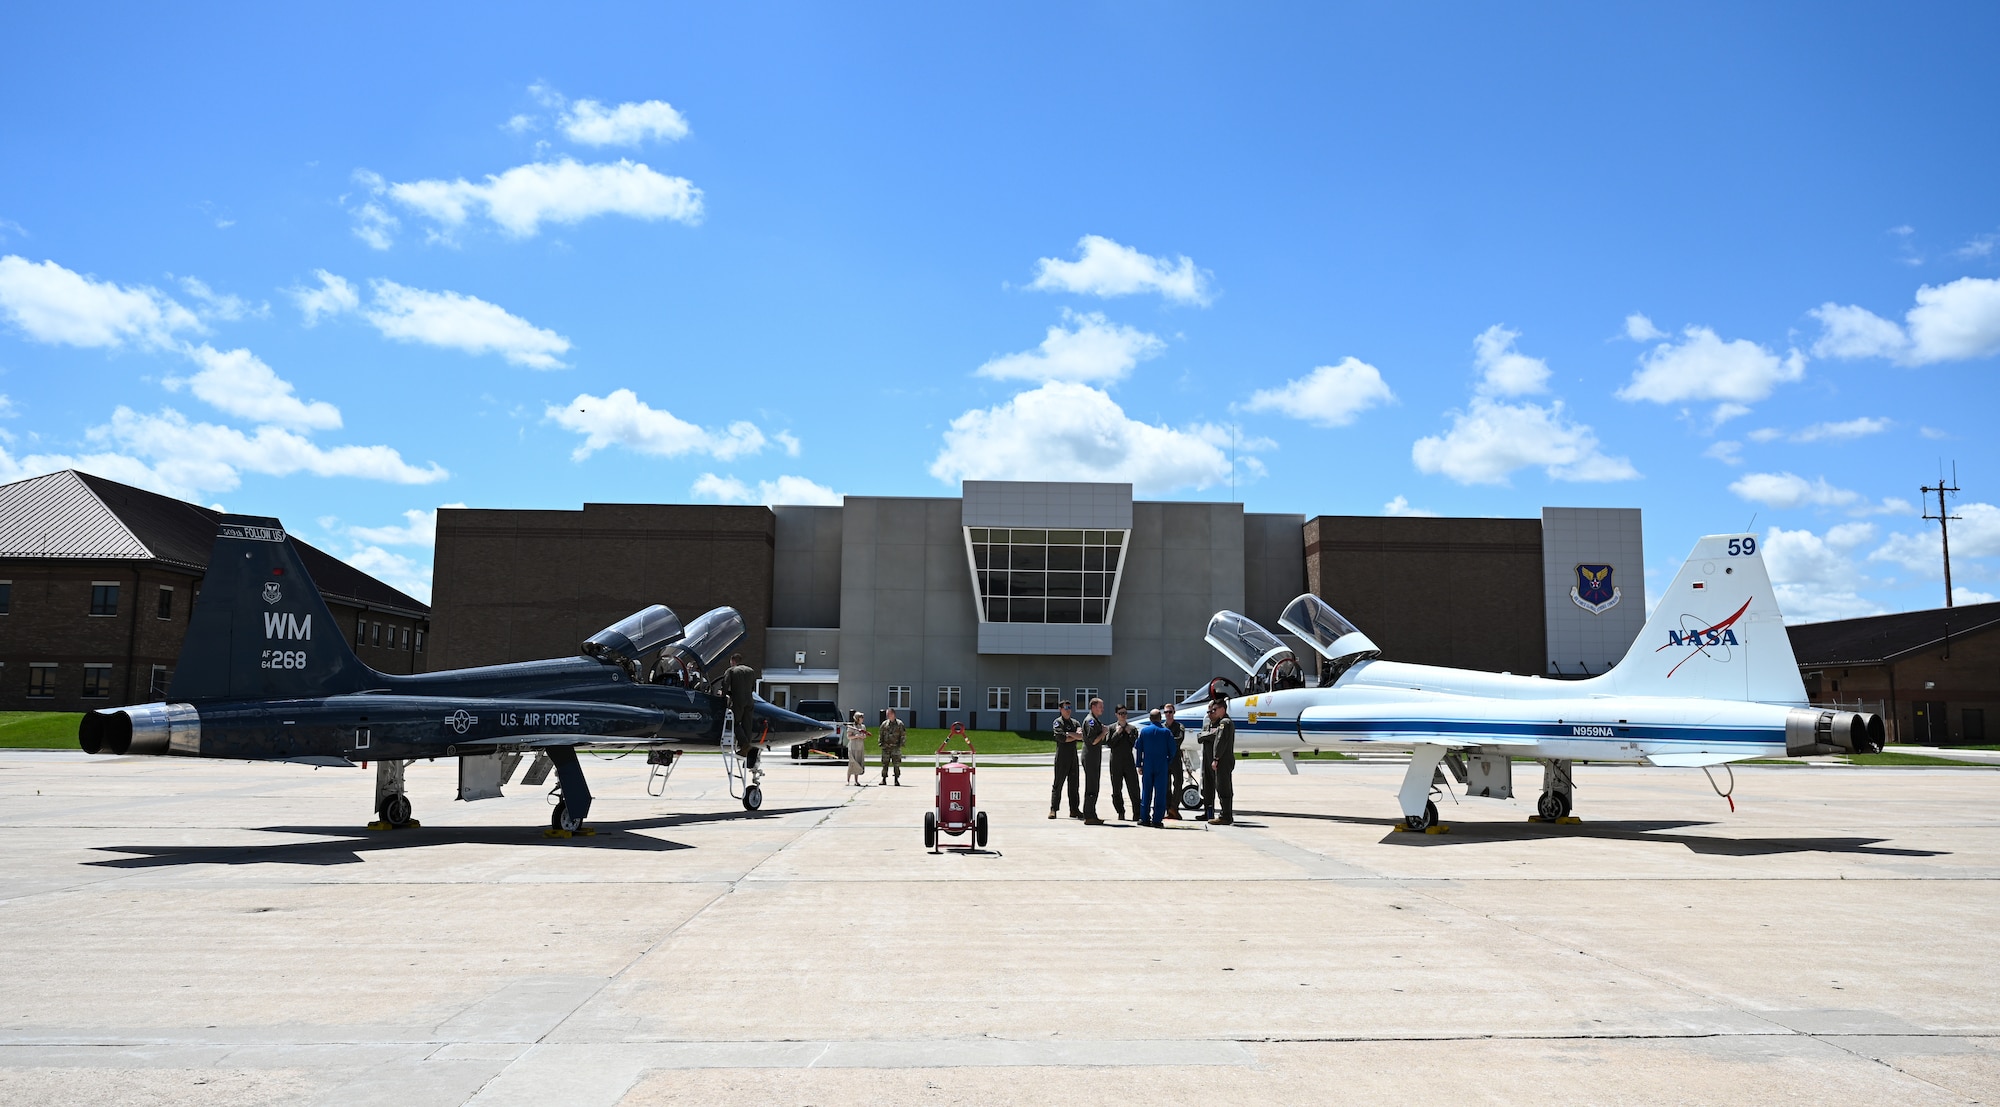 U.S. Air Force Airmen and NASA personnel discuss the T-38N Talon at Whiteman Air Force Base, Missouri, June 7, 2022. NASA employs the T-38N Talon to prepare astronauts and aircrews to respond to events that may jeopardize the mission. Both NASA and the 509th Bomb Wing utilize the T-38 to enhance training so personnel are ready when the mission calls.